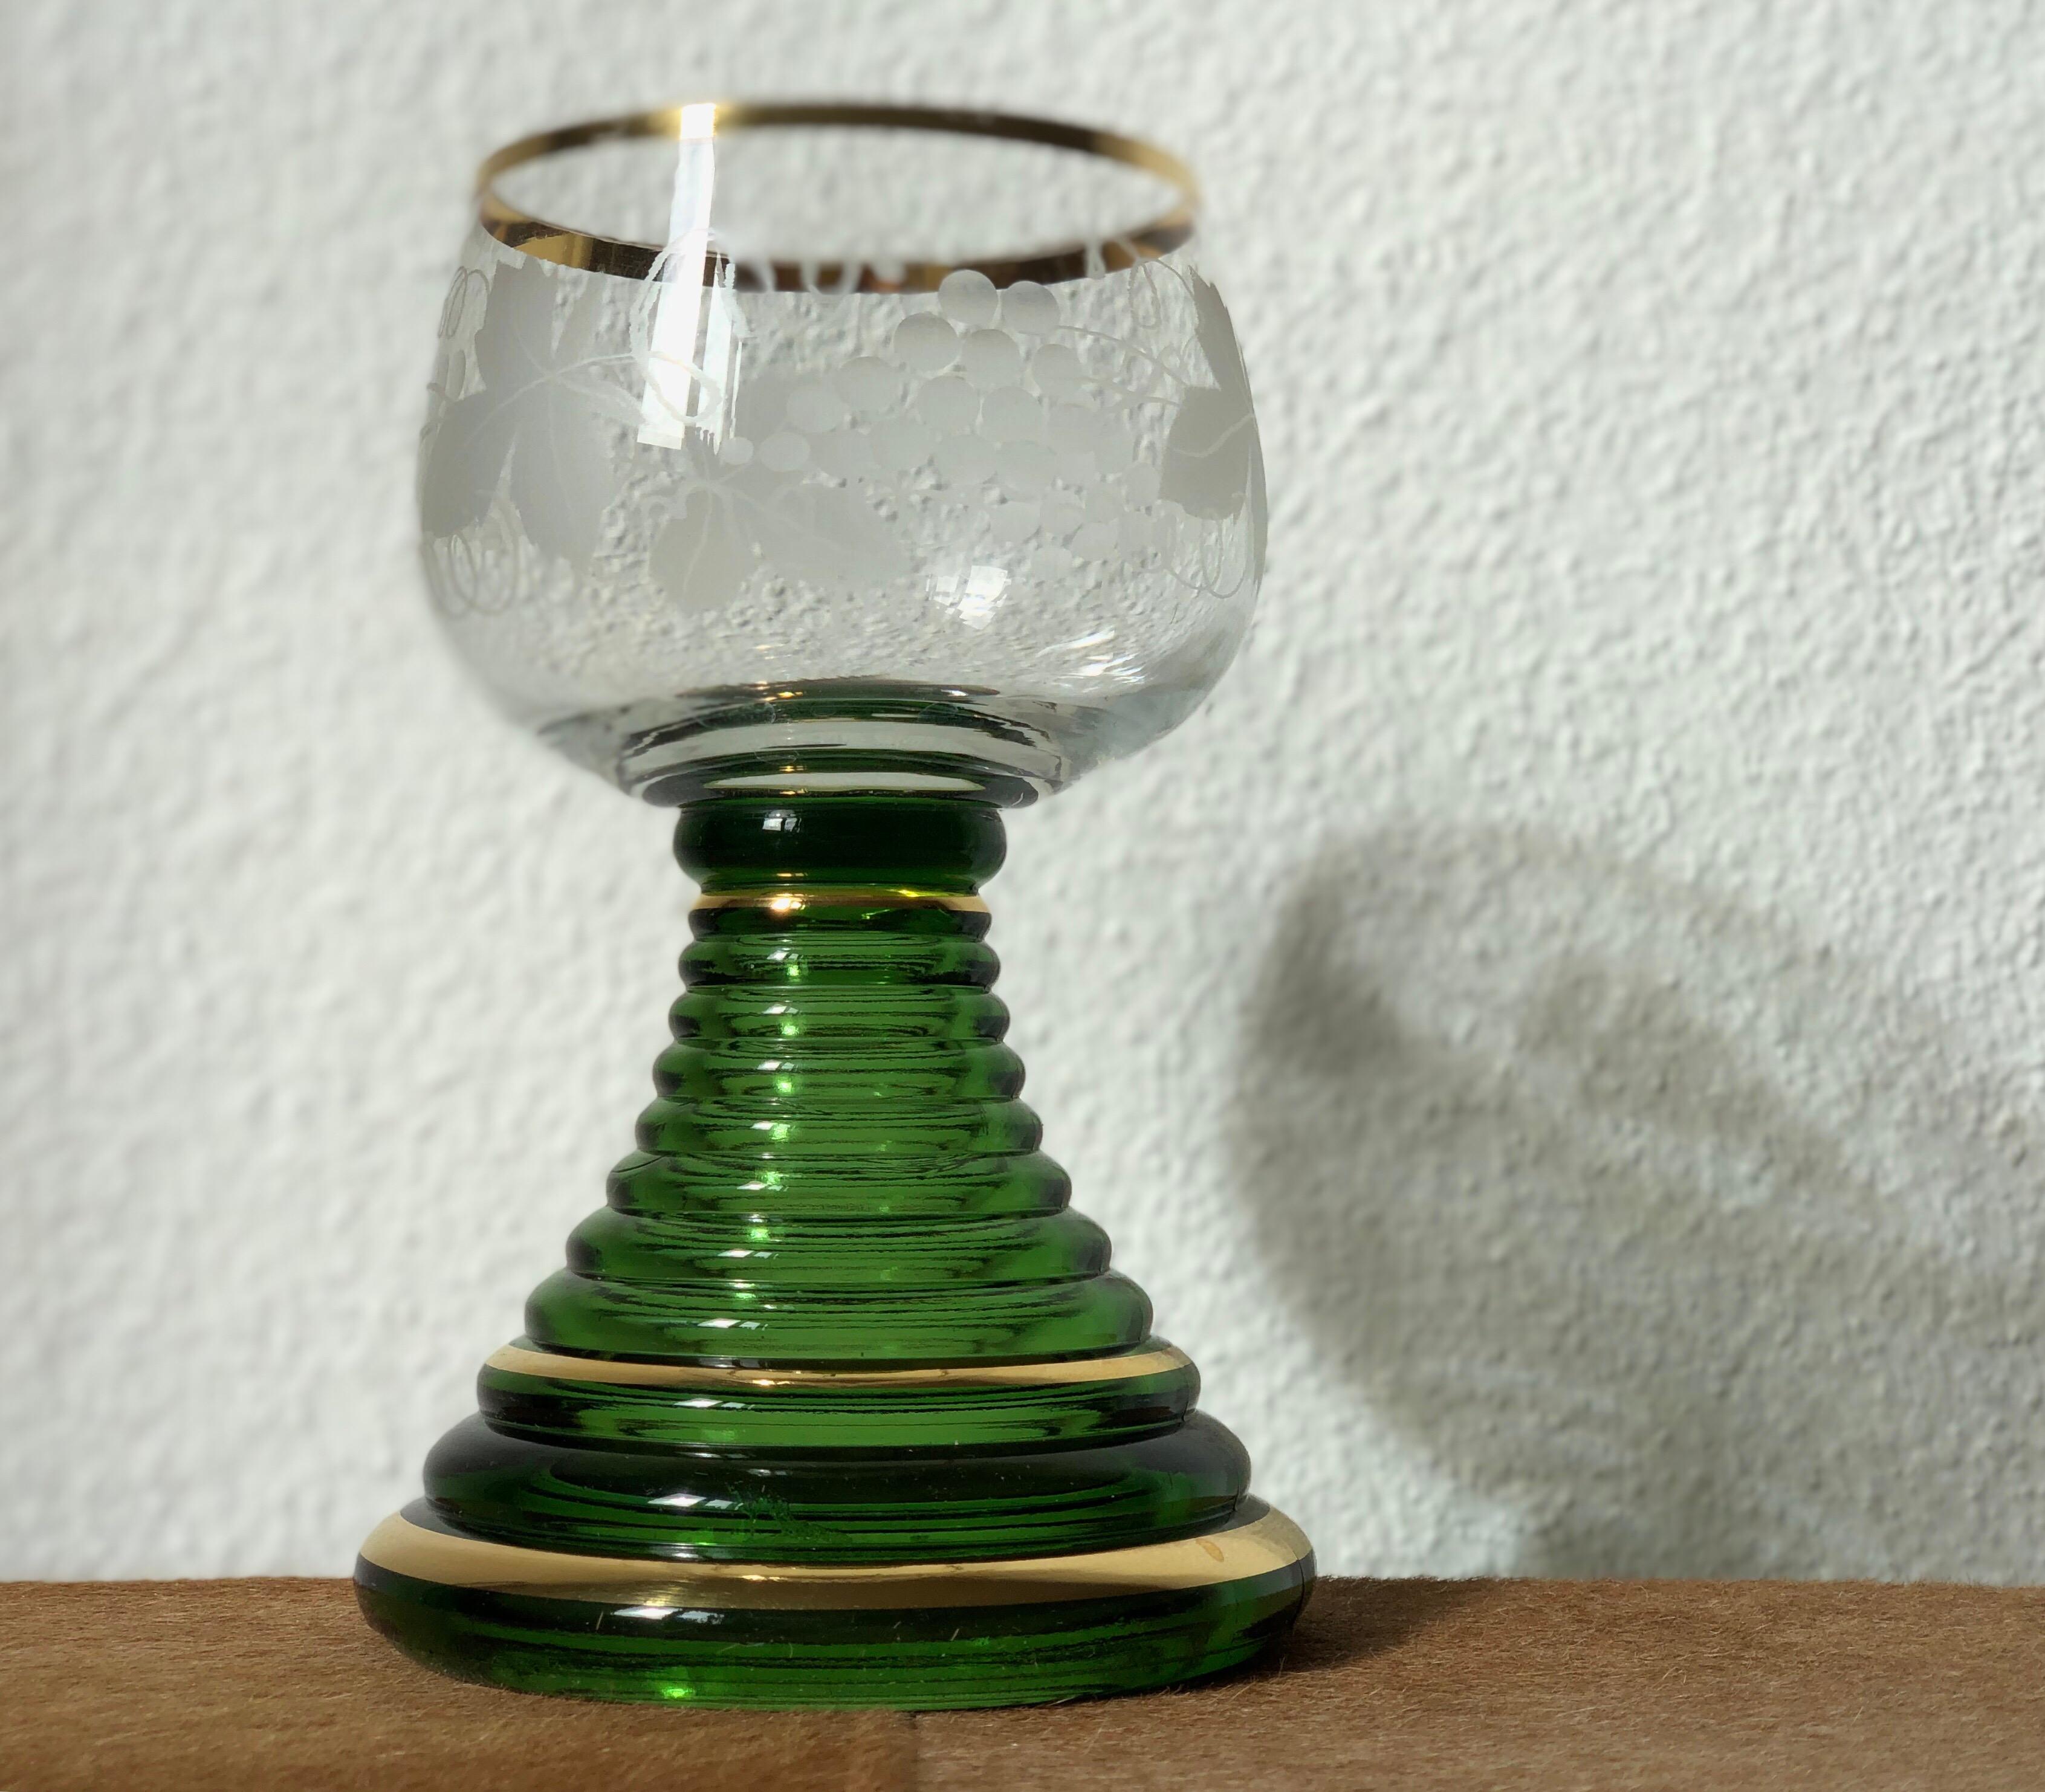 These traditional German Wine Glasses with a green stem are all-over Germany, where they are used to serve sweet wines from the Rhine or Moselle Region.

Romer Gass is a wine glass with a green stem that looks coiled, topped by a clear bowl. Often